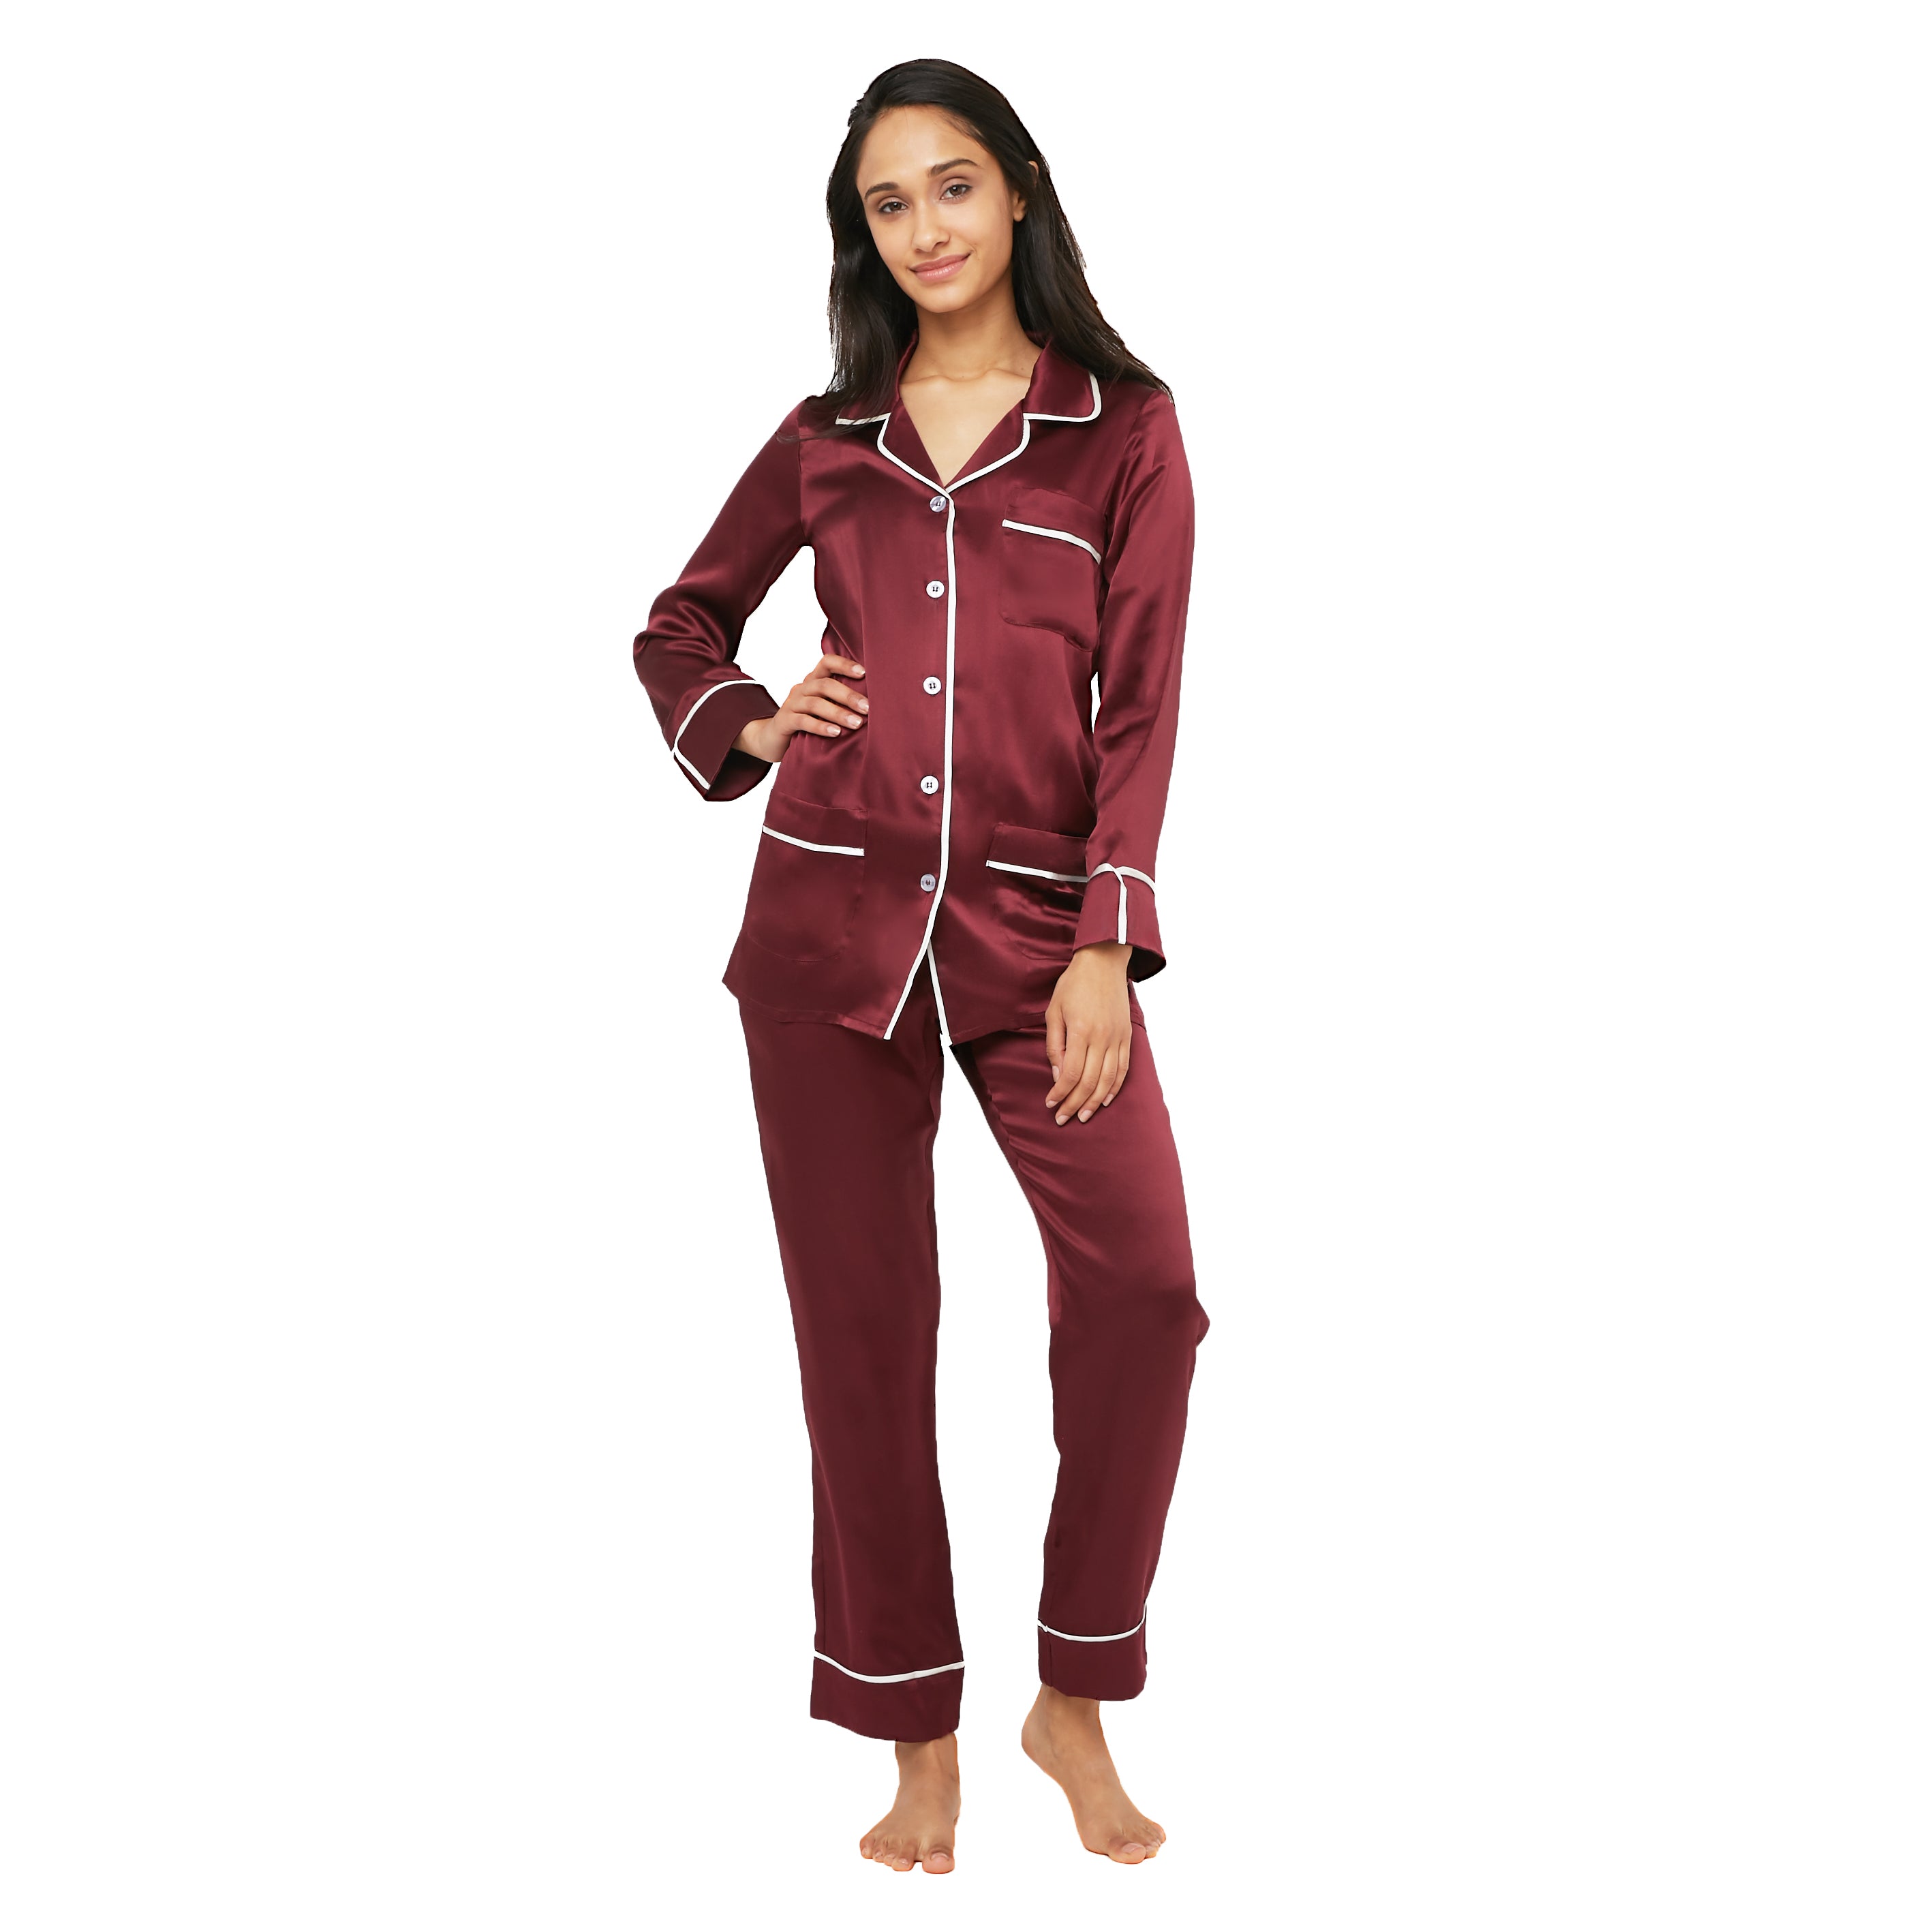 Women's Lounge Pants - Moroccan Rose – S & F Online Store